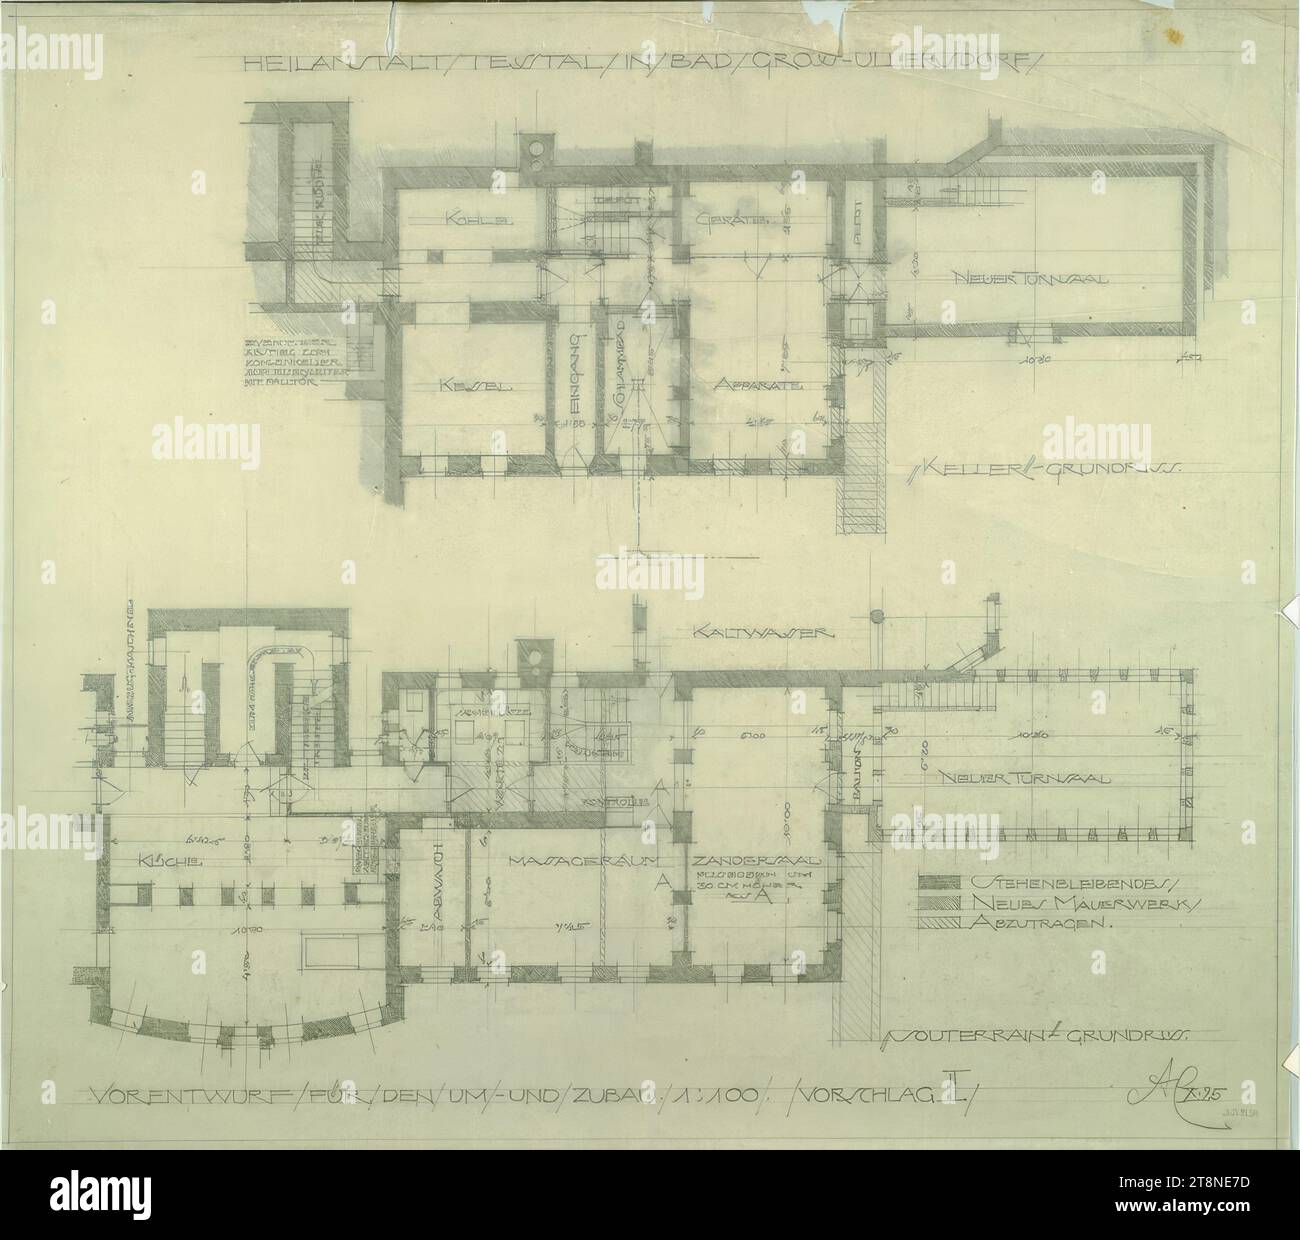 Bad Groß Ullersdorf (North Moravia), Thesstal sanatorium, preliminary design for the conversion and extension, Proposal II, floor plan of the basement and basement, Alfred Castelliz (Celje 1870 - 1940 Vienna), 1925, architectural drawing, Aquafix; Pencil drawing, 41.5 x 46.5 cm, 'HEALTH INSTALLATION/ TESSTAL/ IN/ BAD/ GROSS-ULLERSDORF/', depiction and room designations, technical details, listings, legend, 'PREVIEW/ FOR/ DEN/ UM/ - AND/ CONSTRUCTION/ 1: 100/., PROPOSAL II/ AC X. 25 Stock Photo